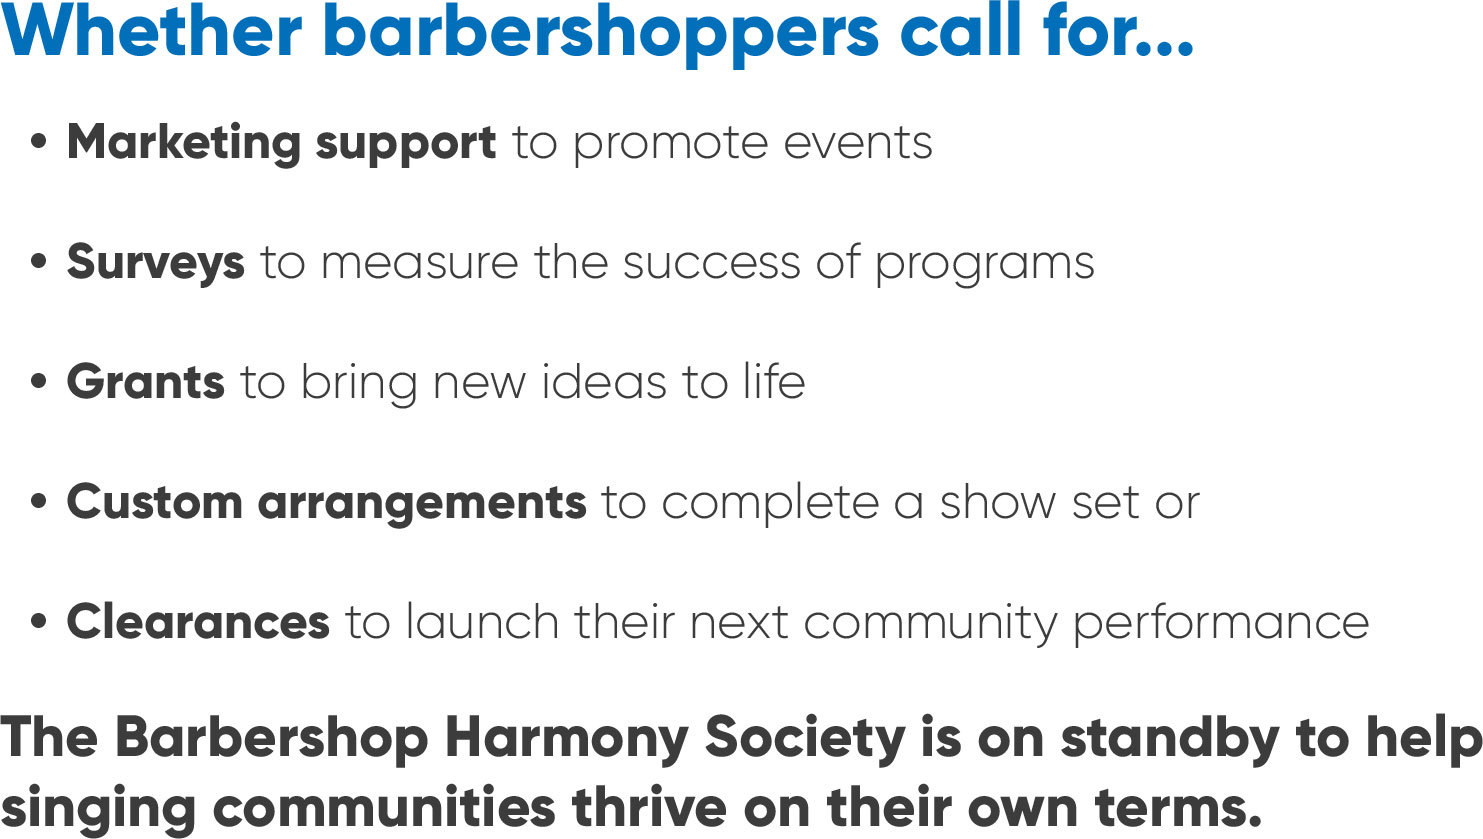 Text whetherbarbershoppers